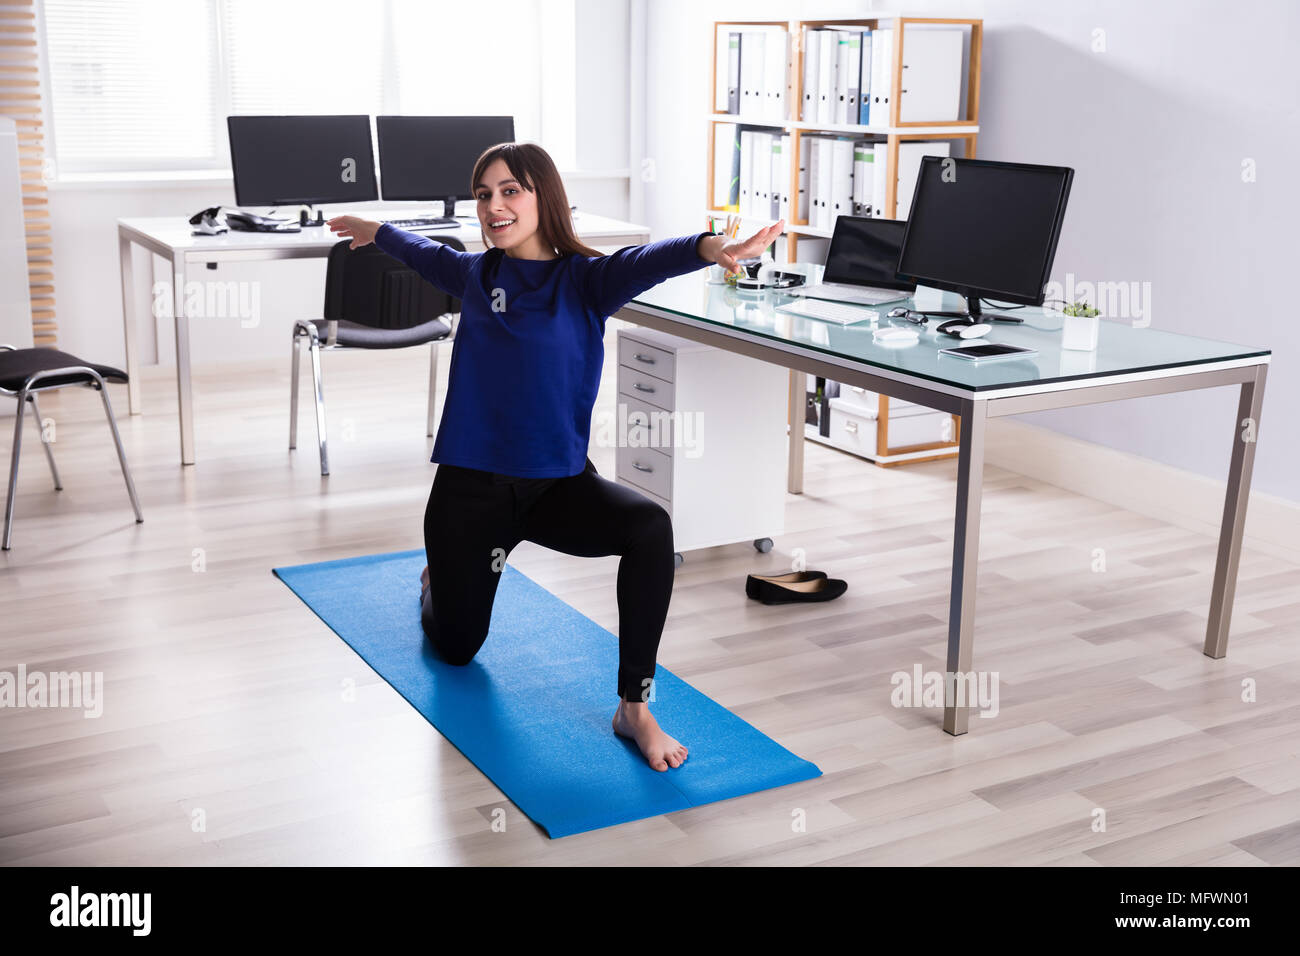 Side View Of A Young Businesswoman Doing Workout On Exercise Mat In Office Stock Photo